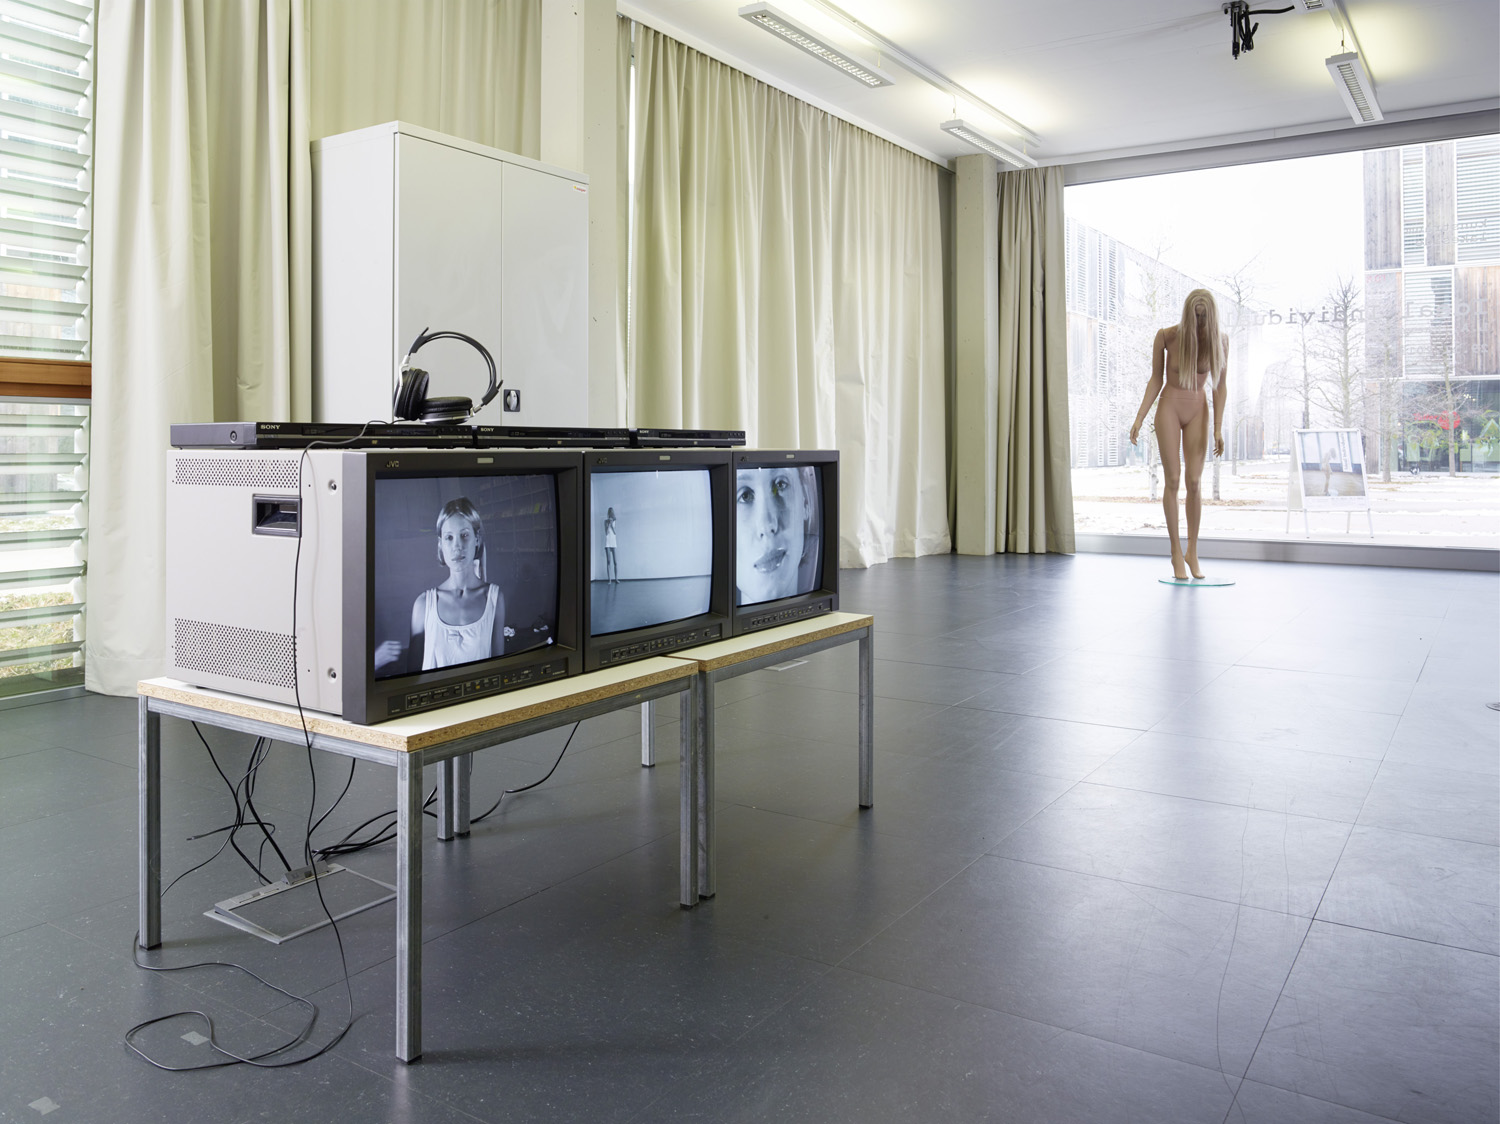 L.A. Raeven — Ideal Individuals, Kunstraum Lakeside, 2013/2014 | Foto: Johannes Puch